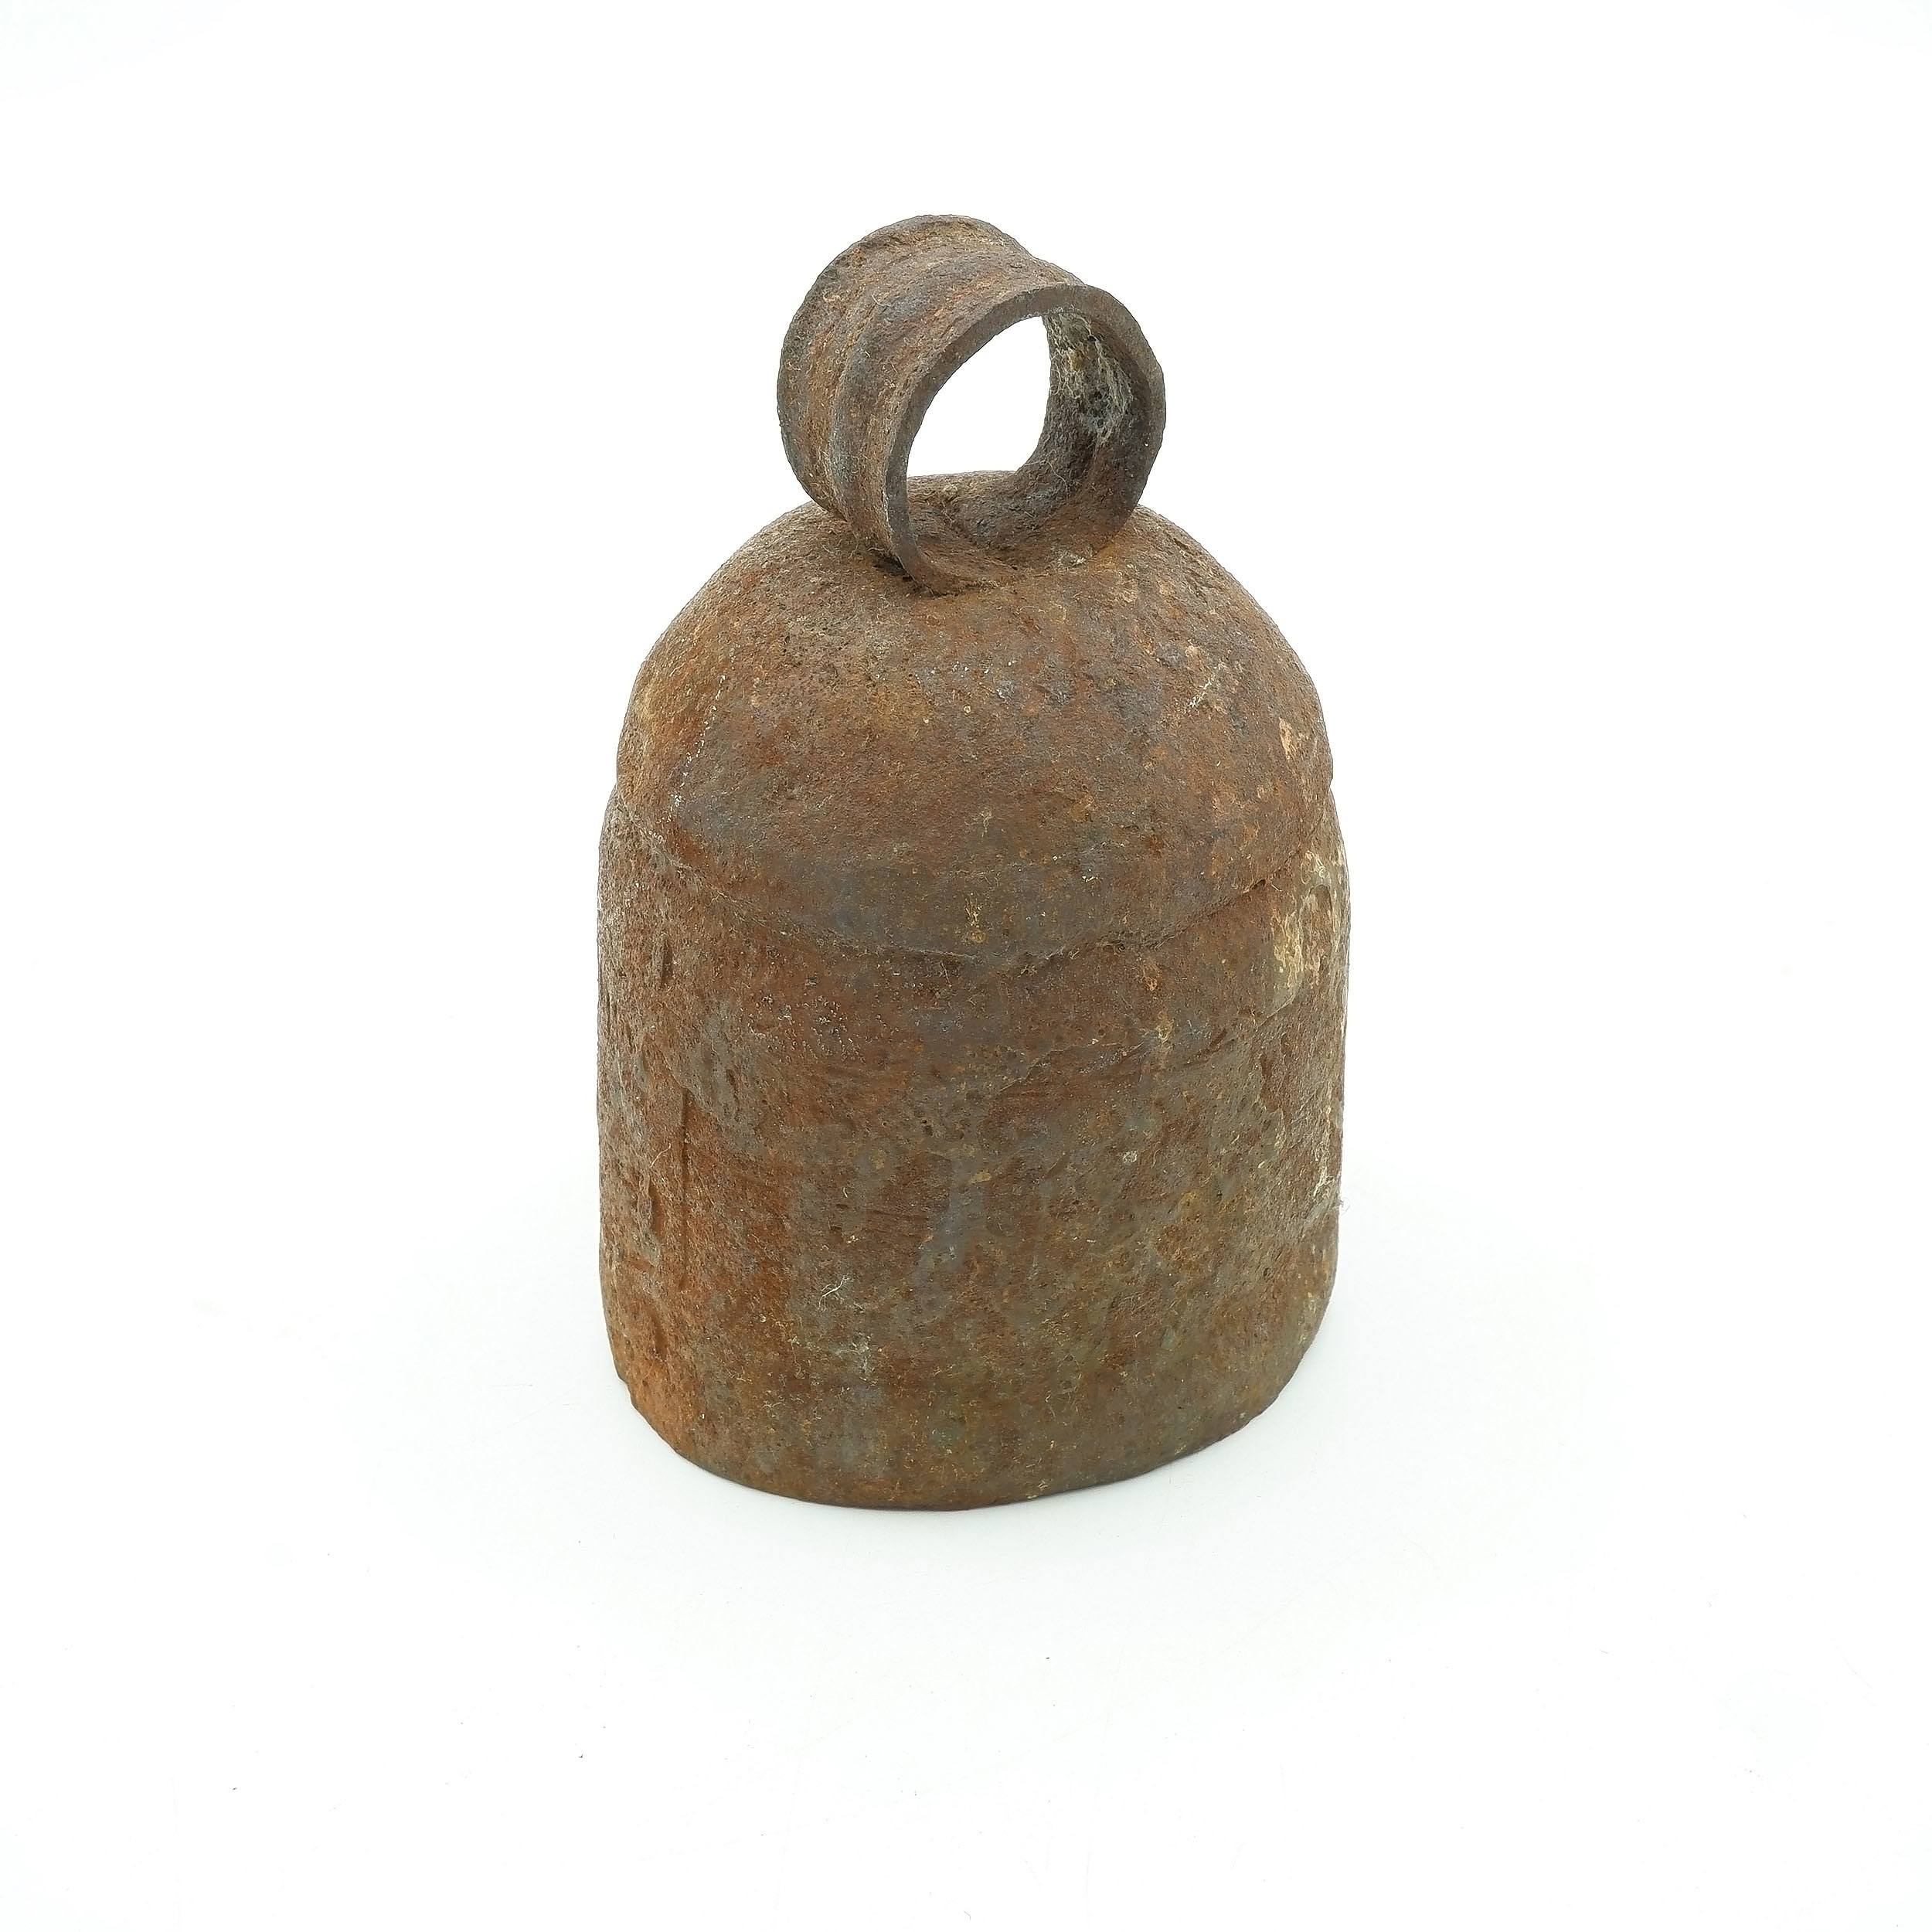 'Old Bedouin Camel Bell with Camel Bone Clapper 1950s'